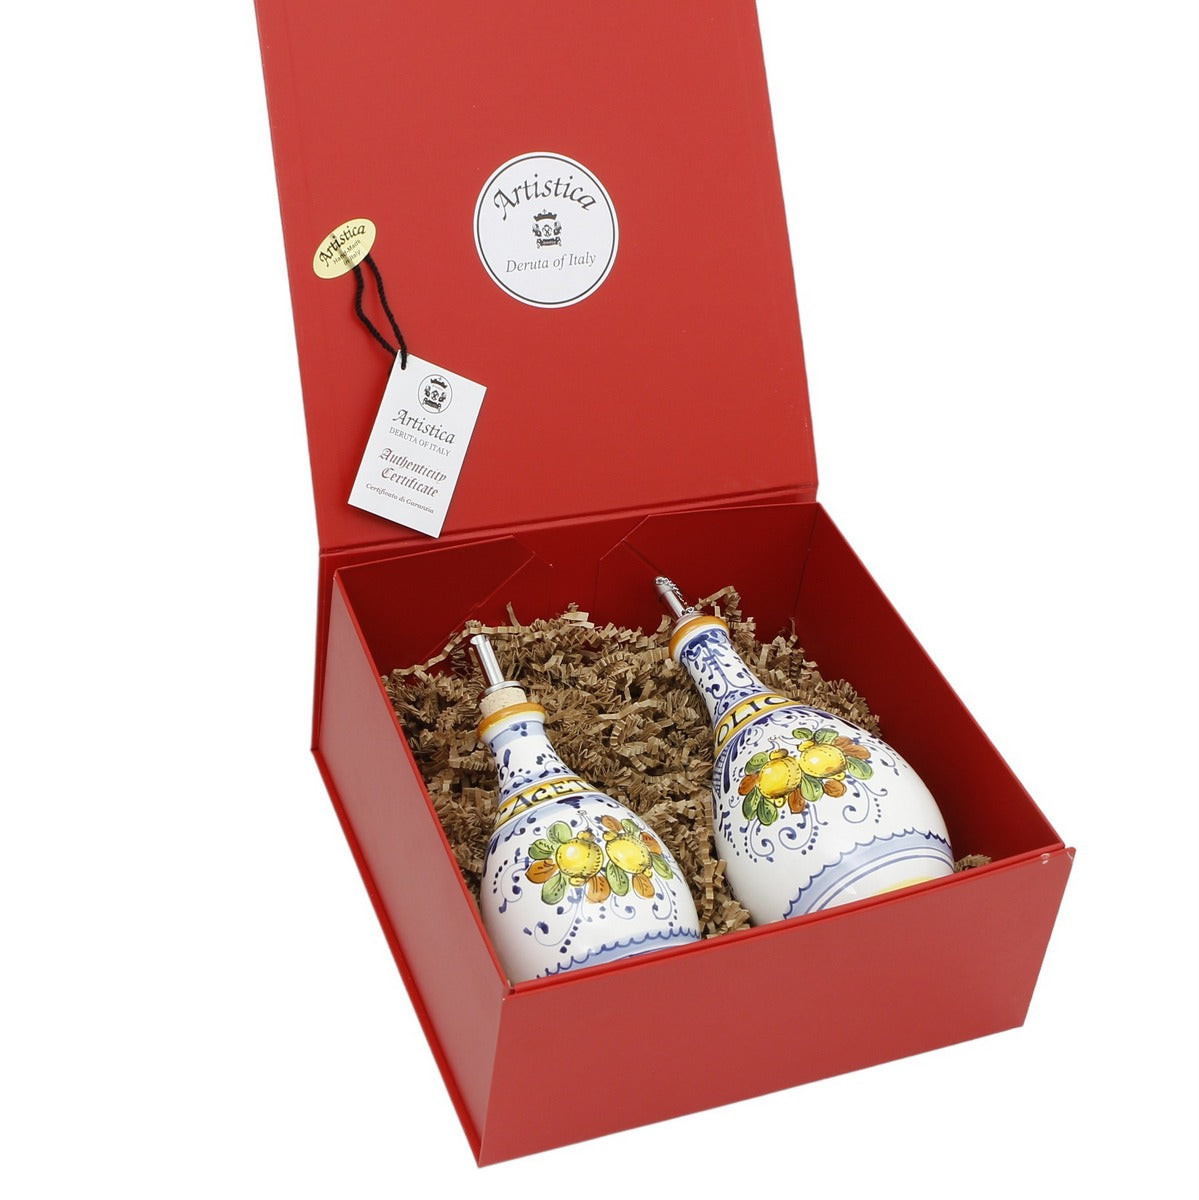 GIFT BOX: DeLuxe Glossy Red Gift Box with LIMONCINI: OLIVE OIL AND VINEGAR (ACETO) BOTTLES/DISPENSER SET (Set of 2 pcs)